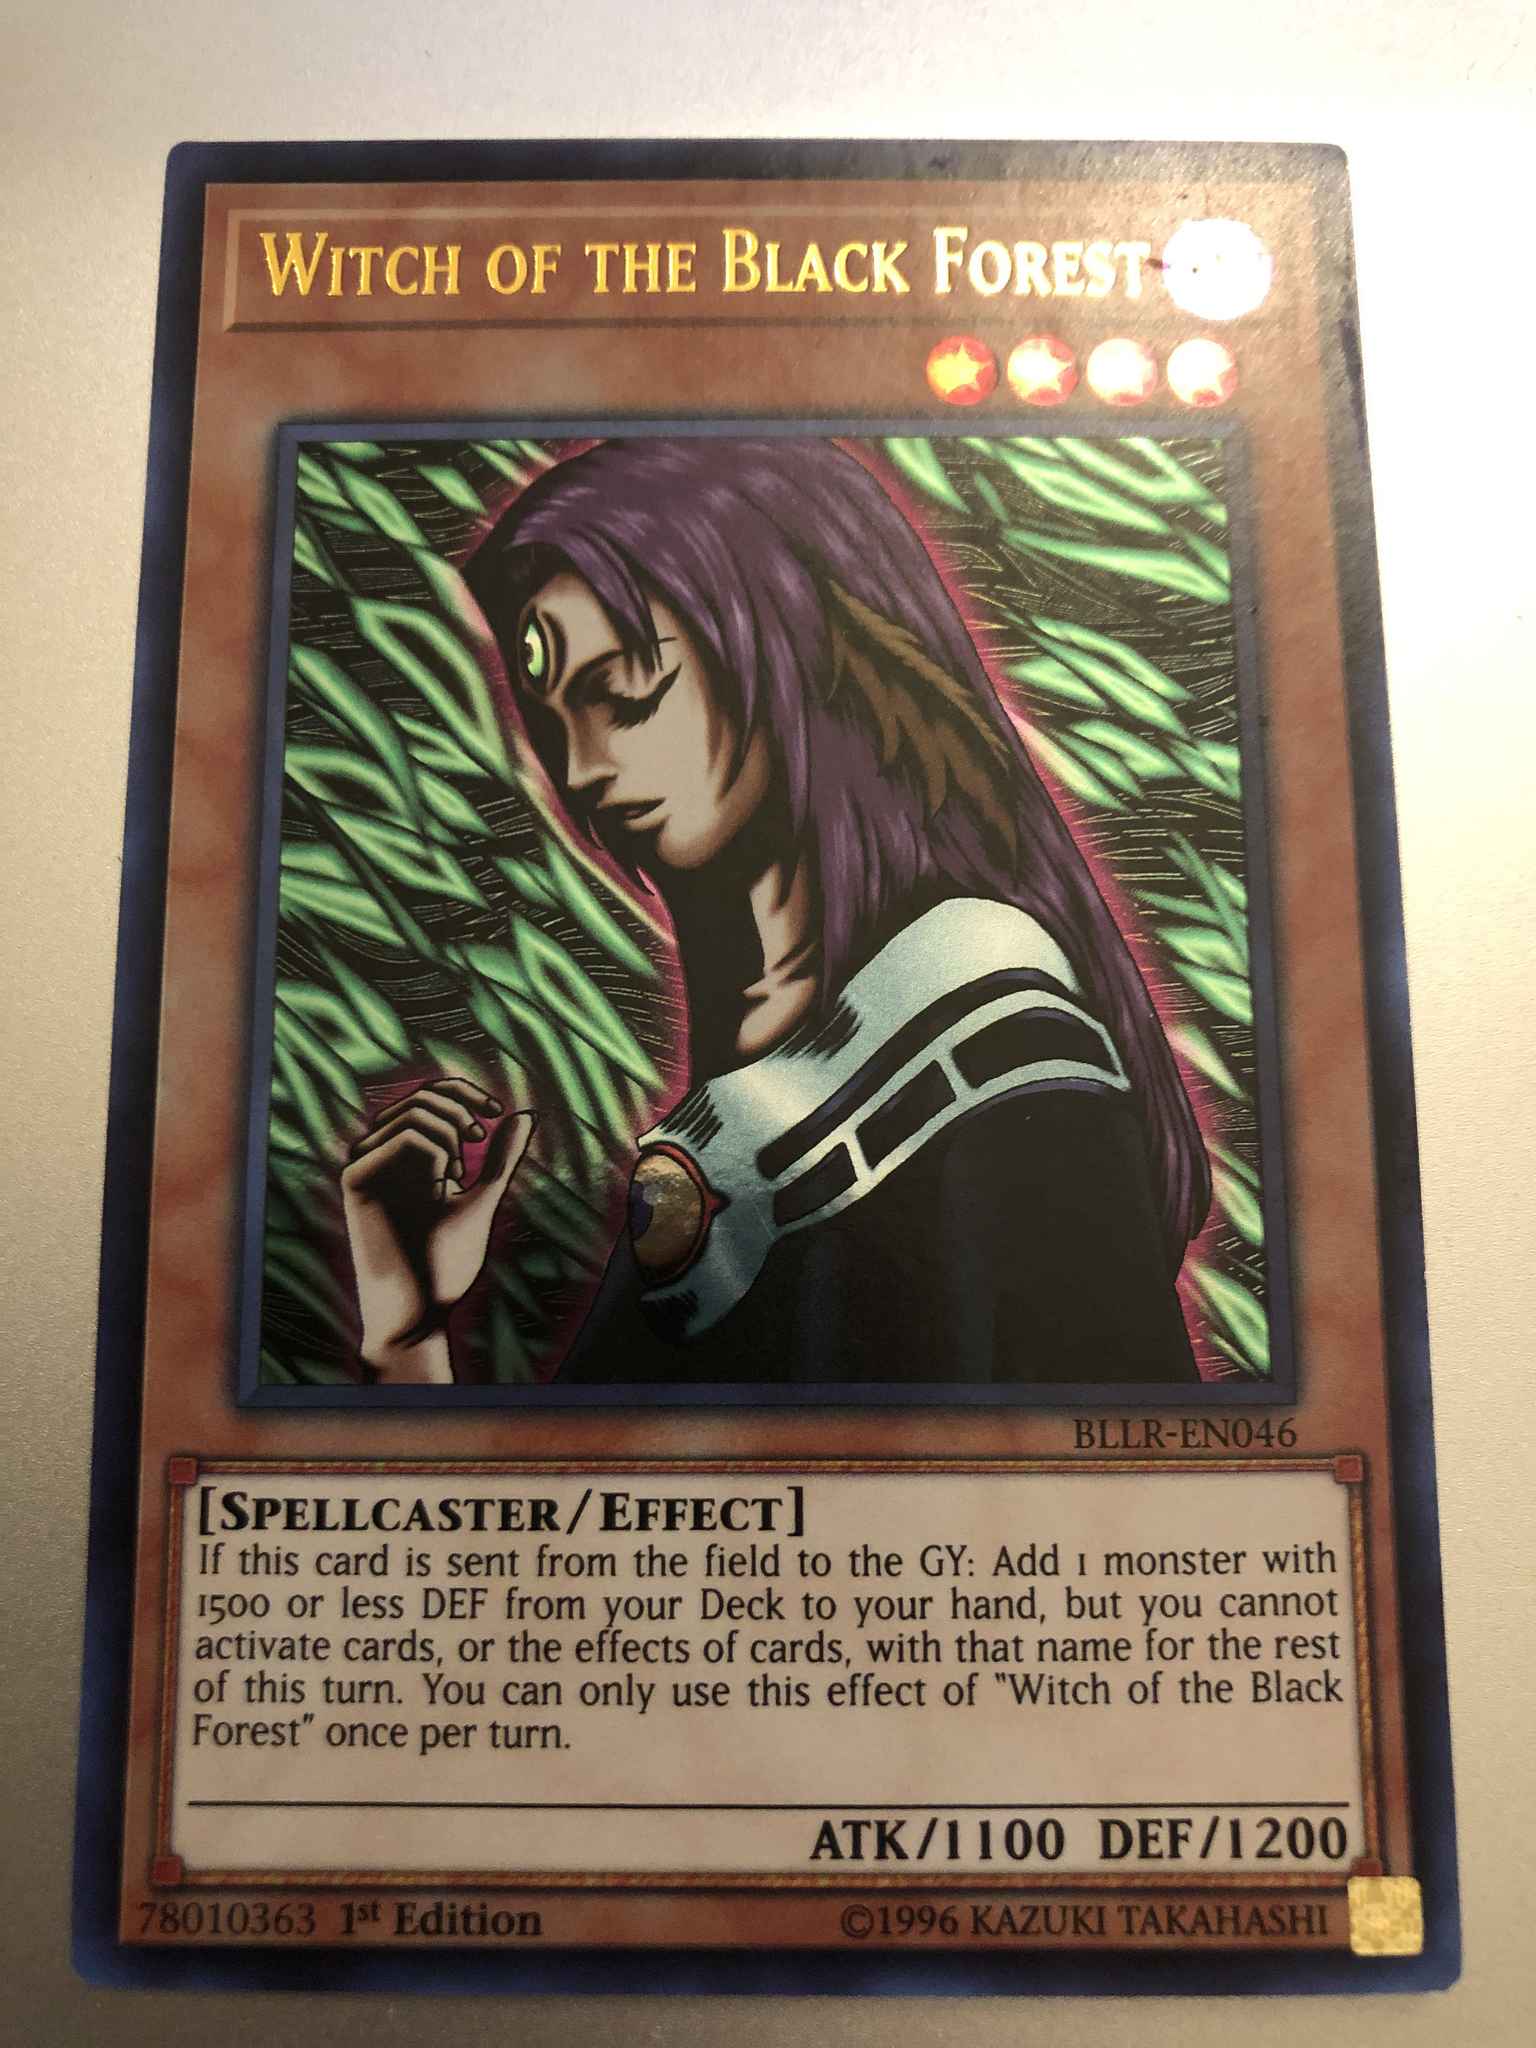 Witch of the Black Forest BLLR-EN046 Ultra Rare 1st NM Yugioh